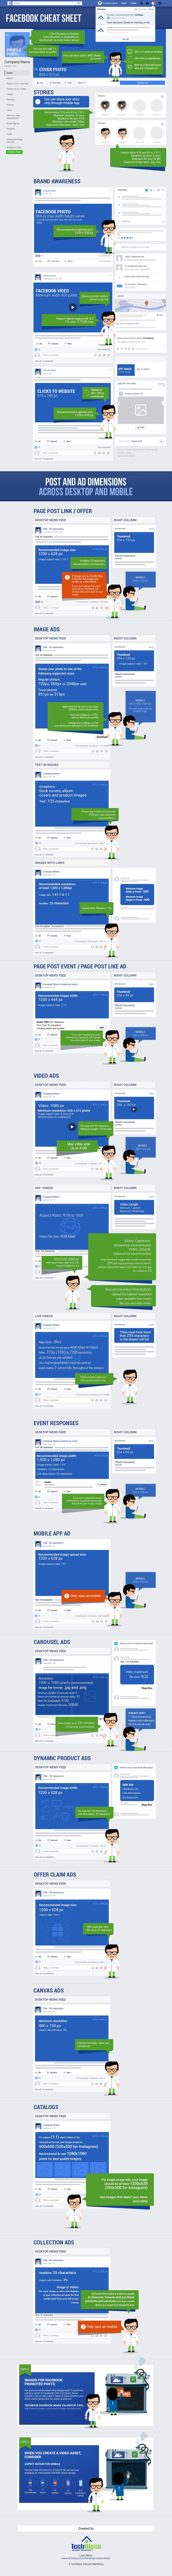 cheat sheet: image sizes for facebook [infographic] - shane barker